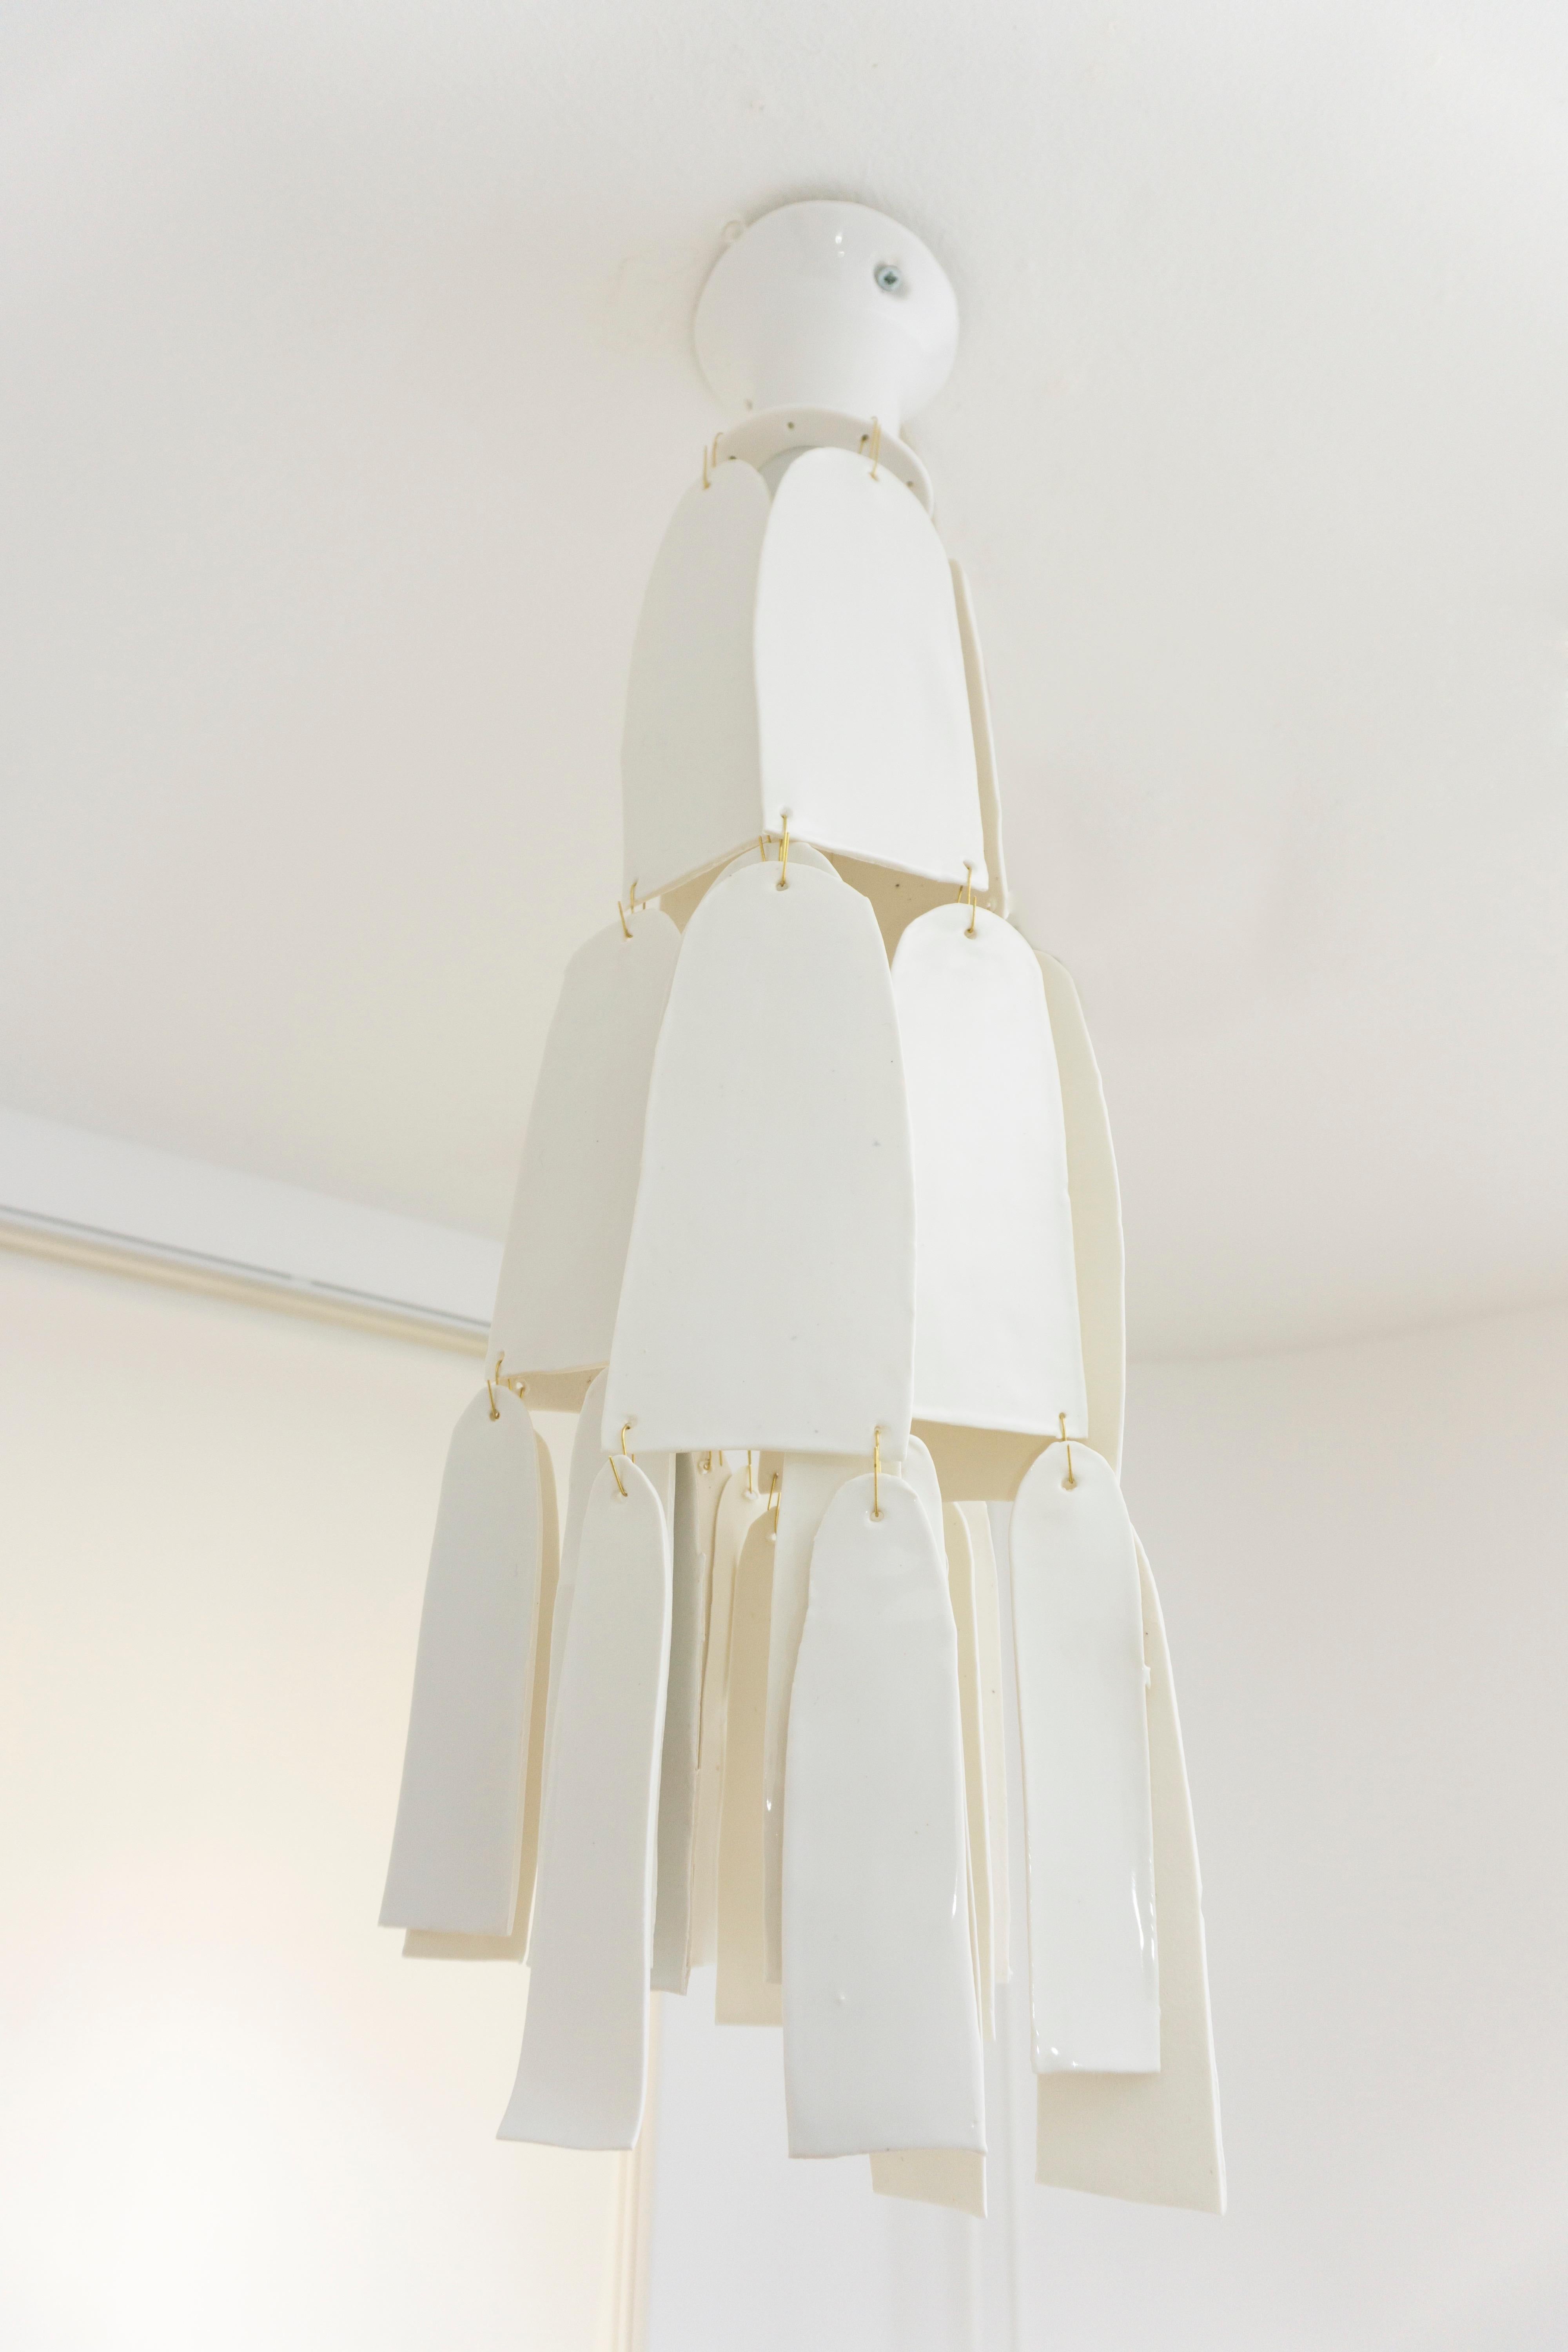 Unique and delicate chandelier, made of porcelain with a glossy white glaze. Catches the light playfully with its pending petals.